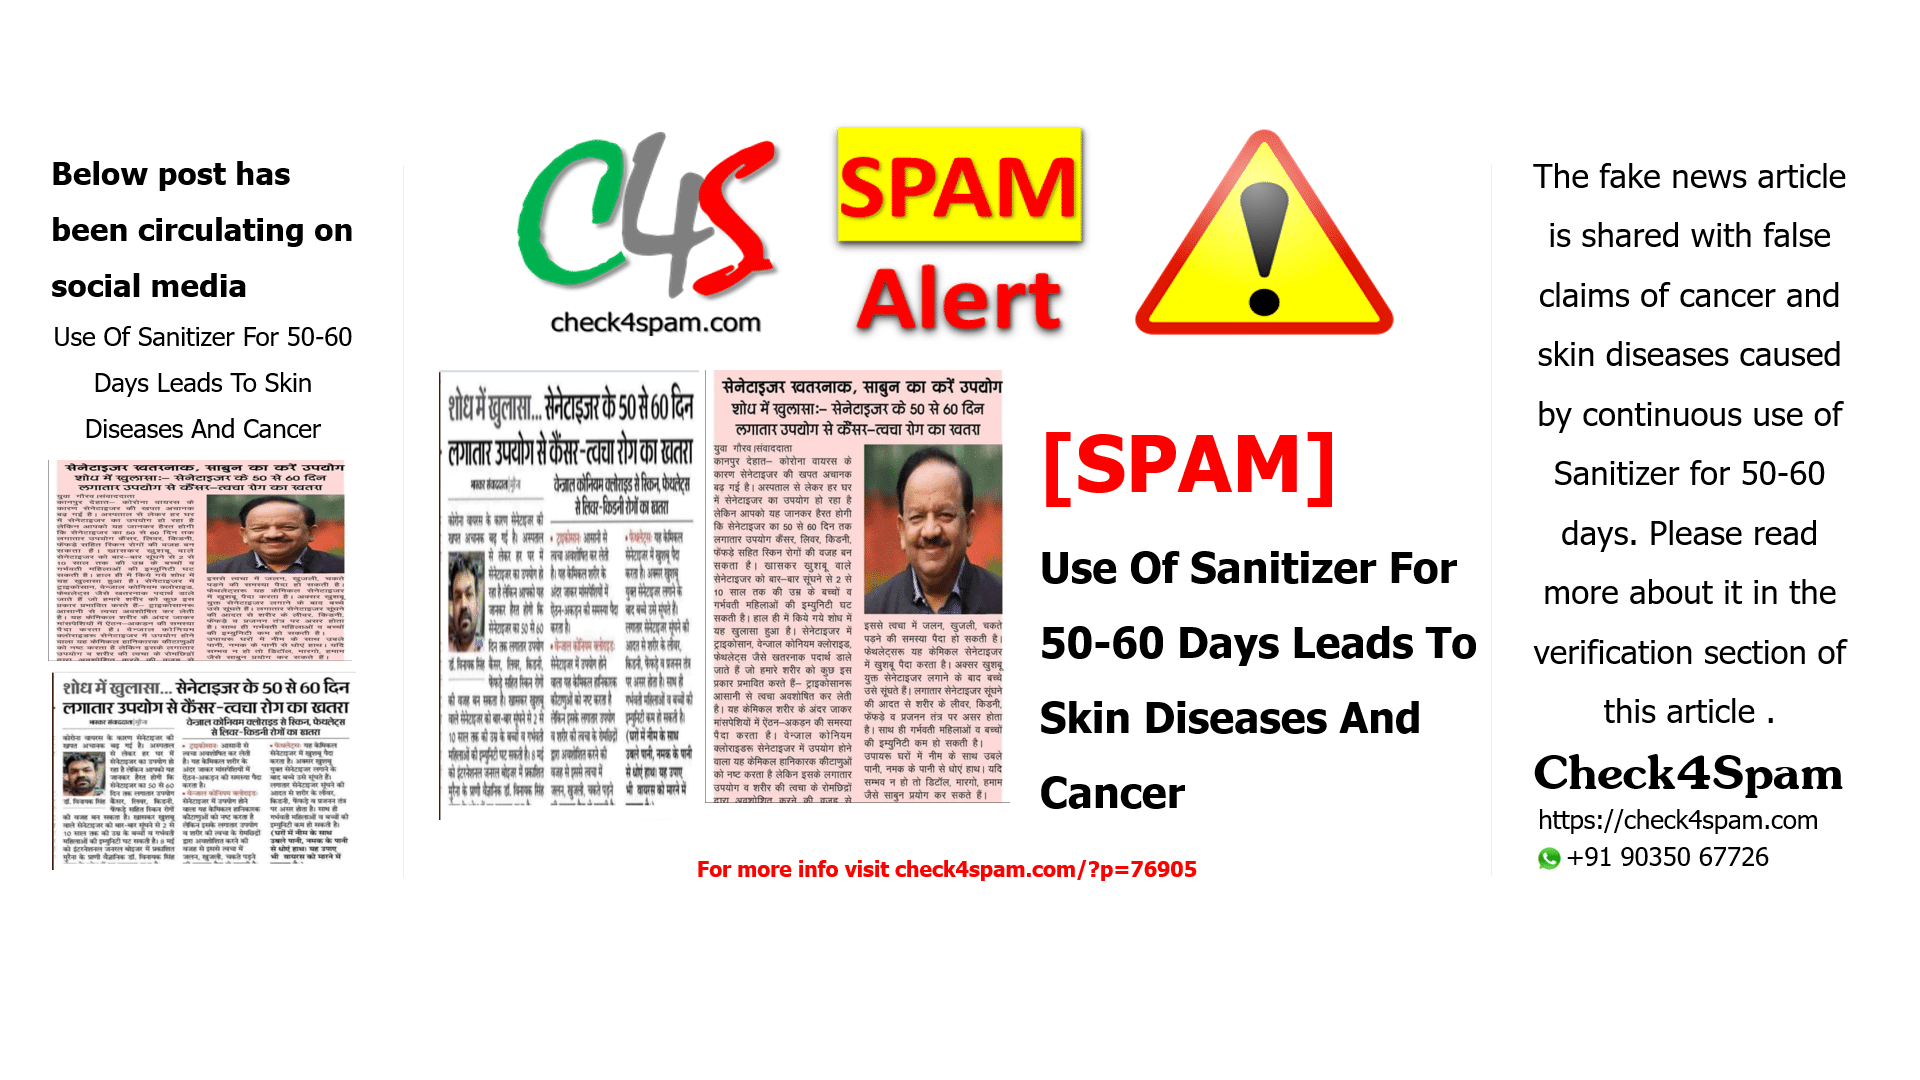 Use Of Sanitizer For 50-60 Days Leads To Skin Disease And Cancer